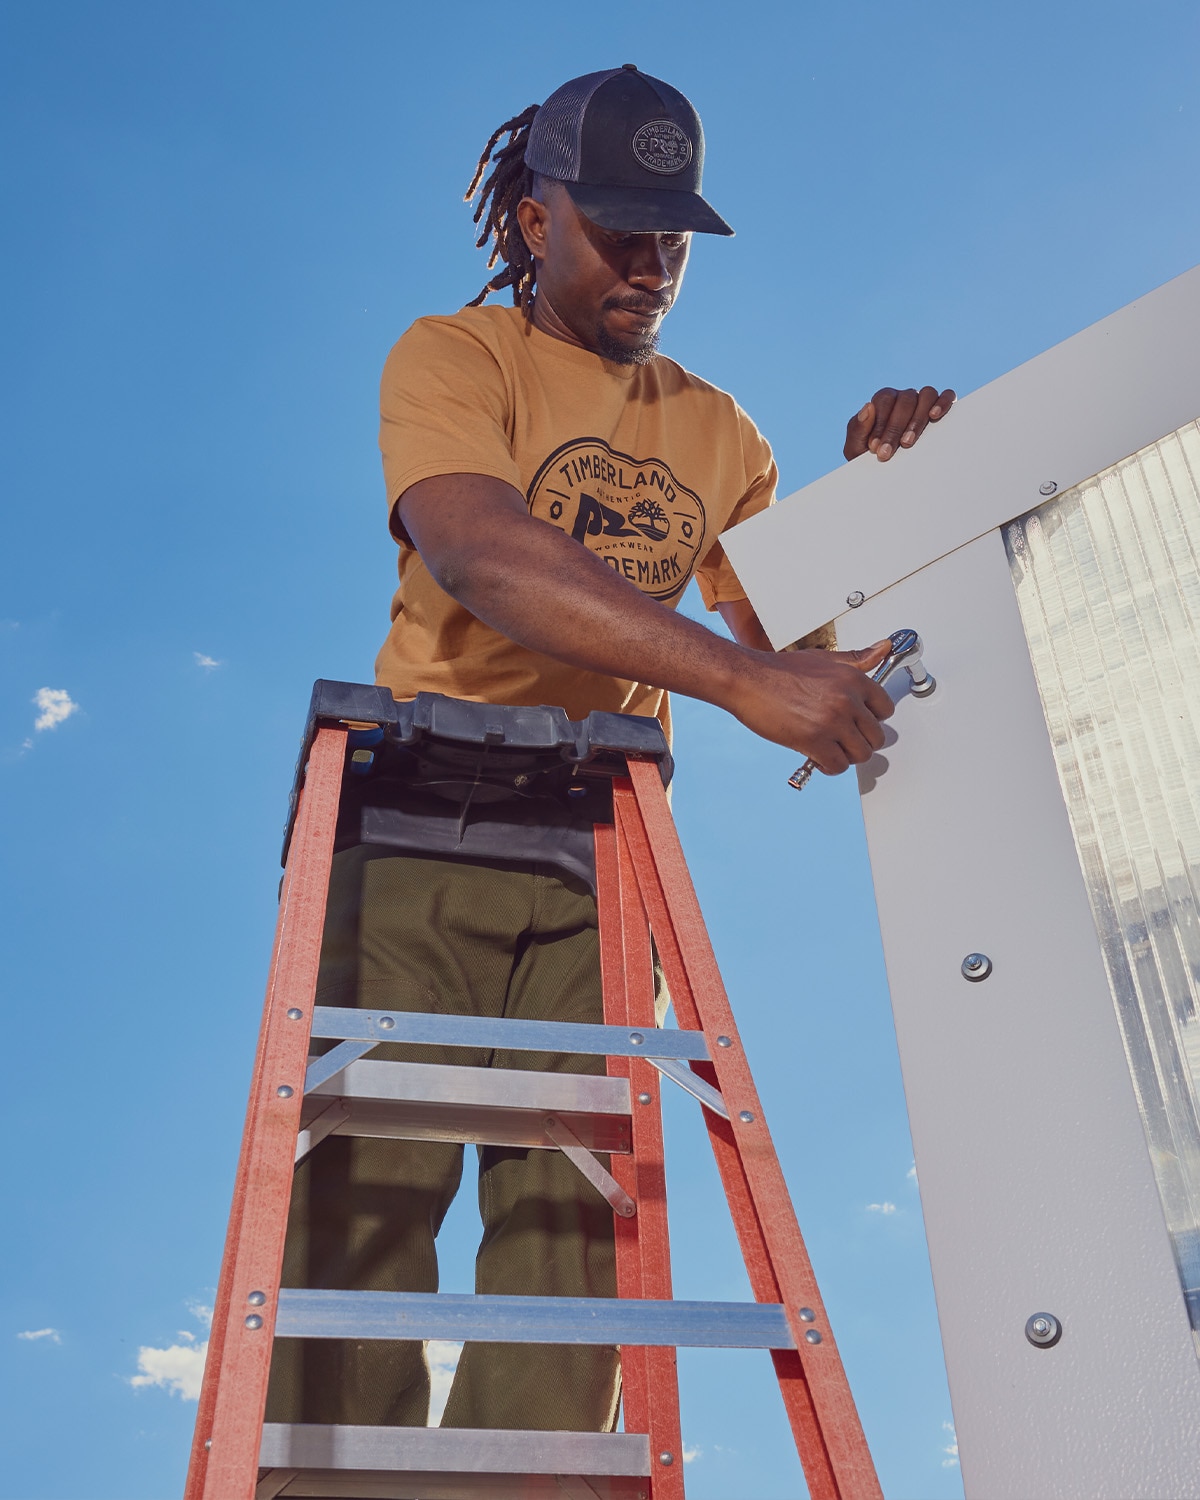 image of man wearing a yellow shirt and a cap standing on a ladder doing work